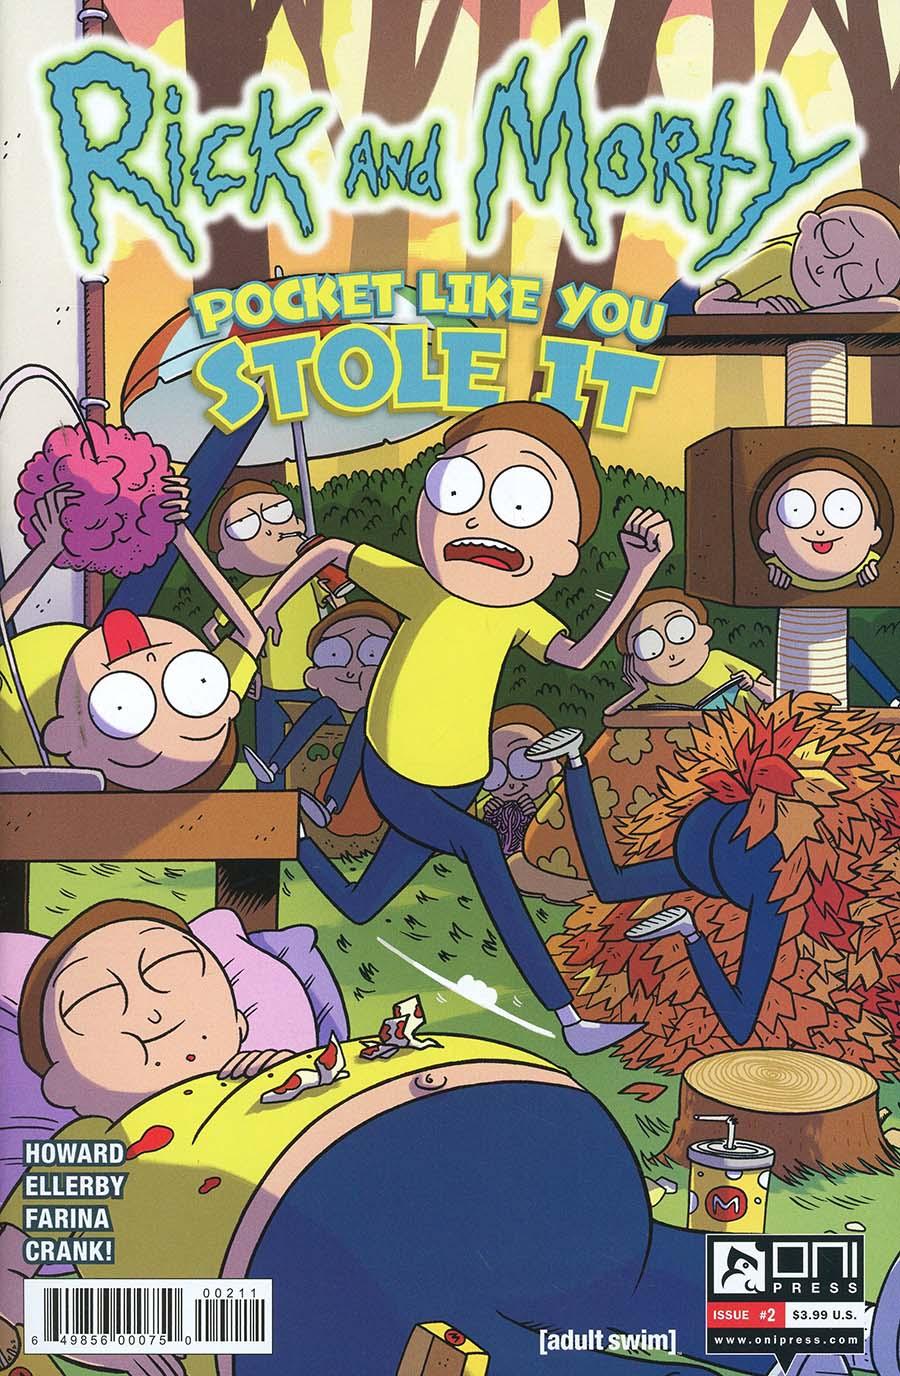 Rick And Morty Pocket Like You Stole It Vol. 1 #2